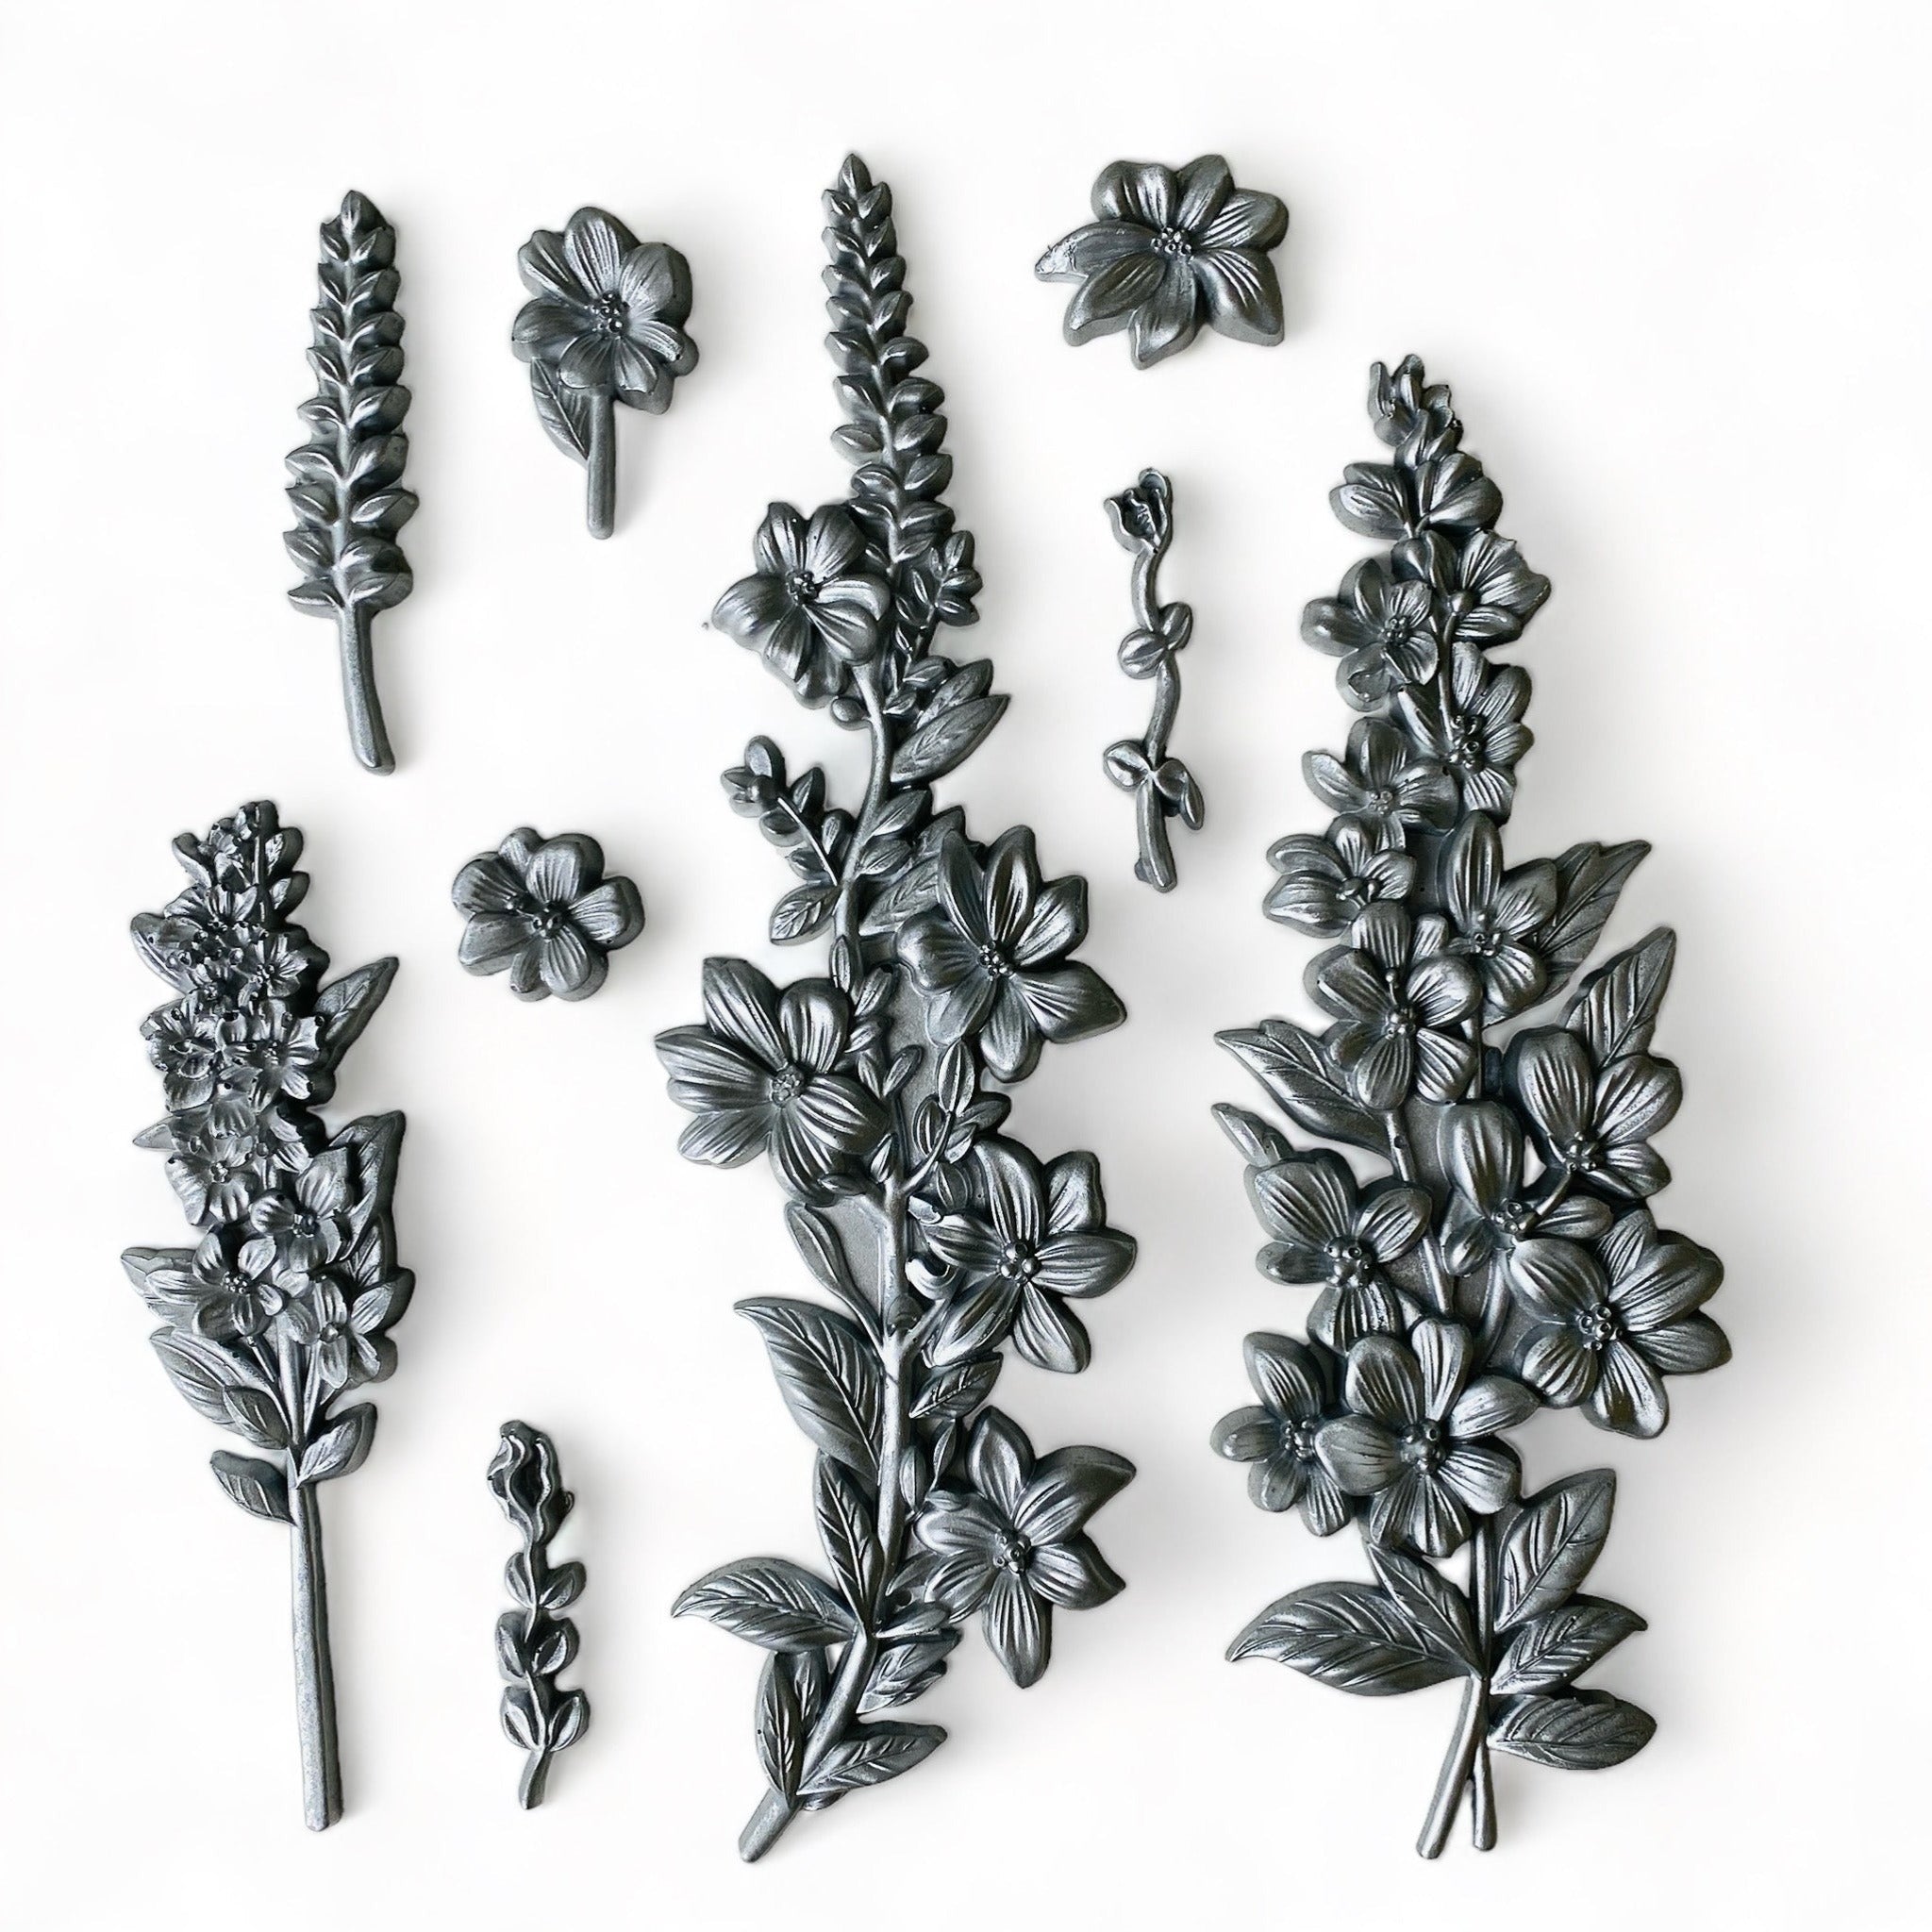 Silver-colored silicone mold castings that feature petite flower clusters are against a white background.